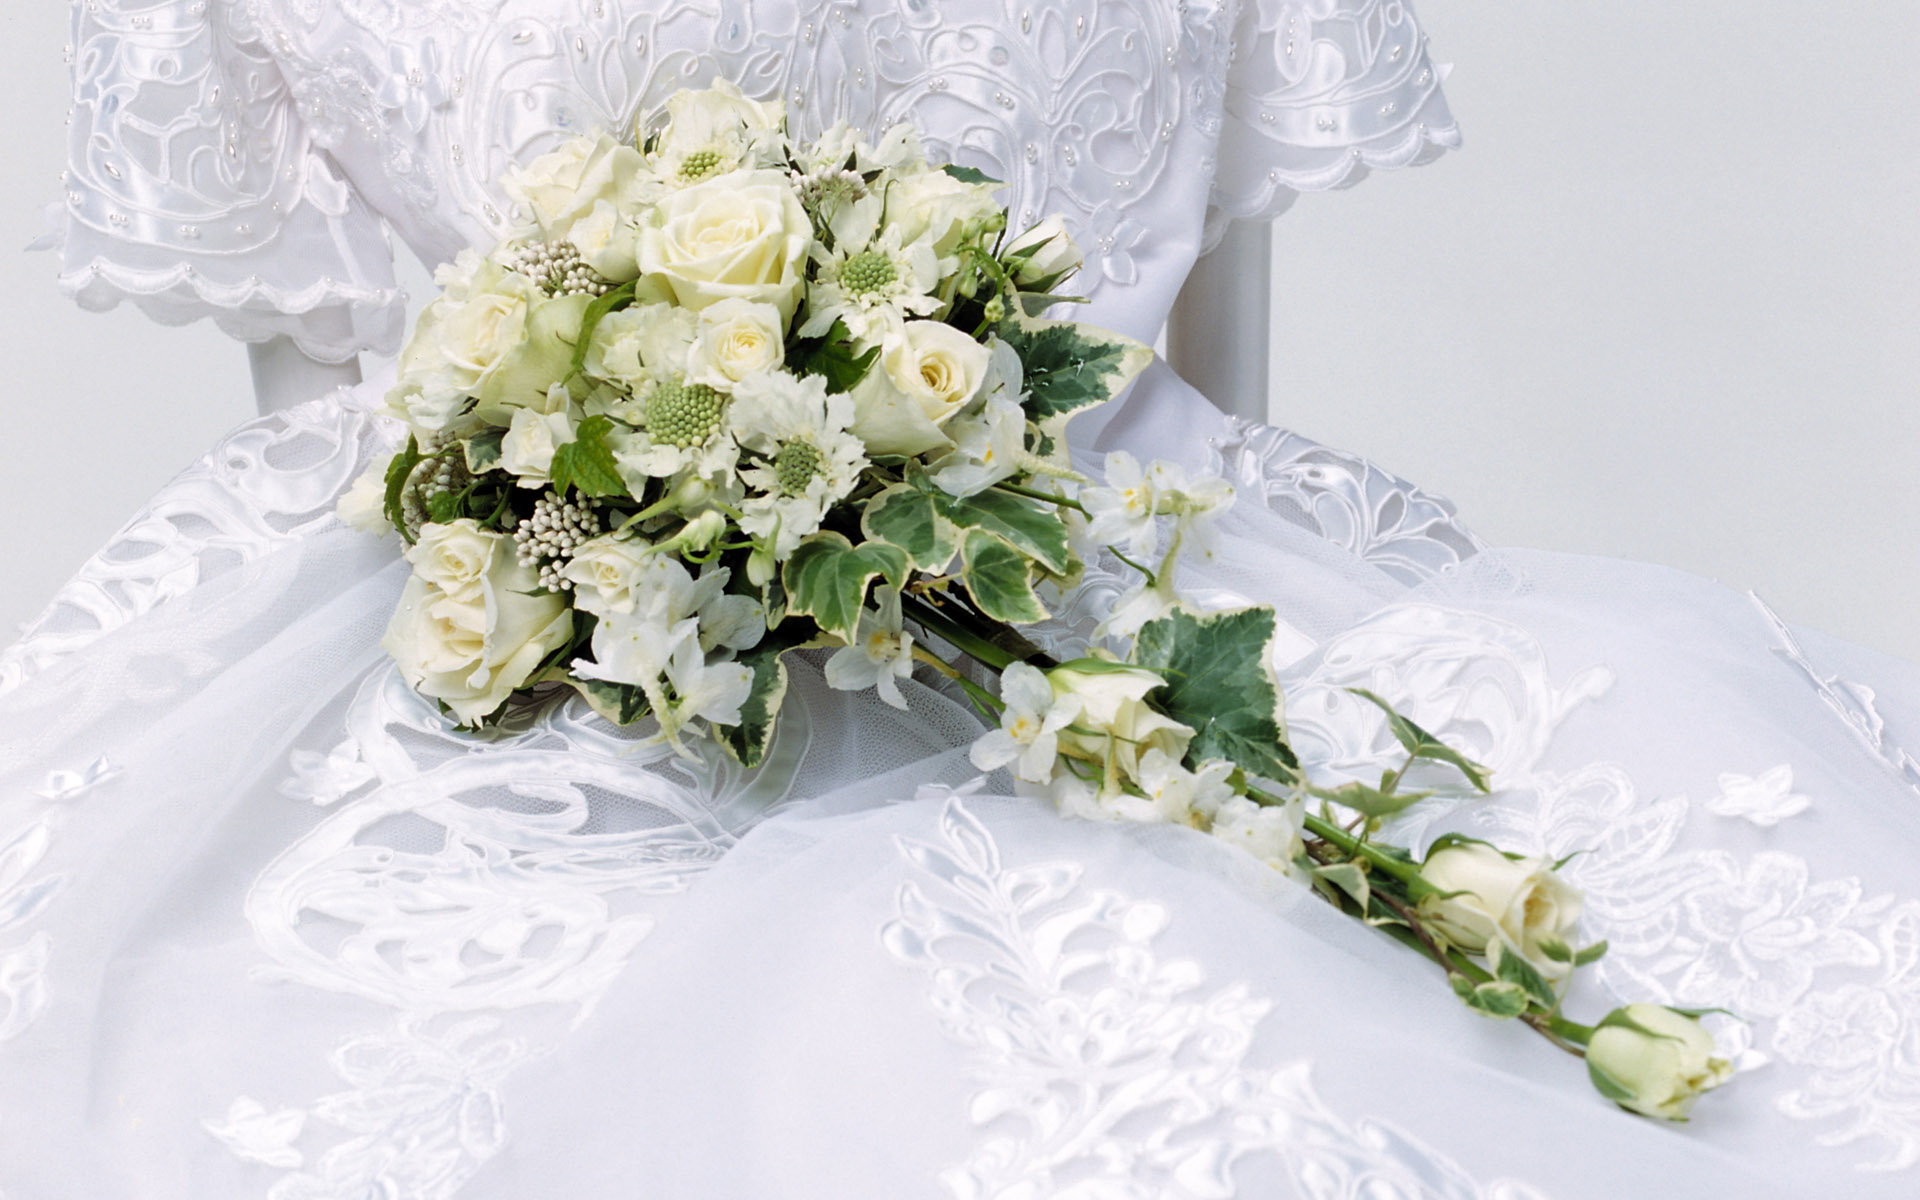 Wedding Flower Images Background Hd 2 Thumb